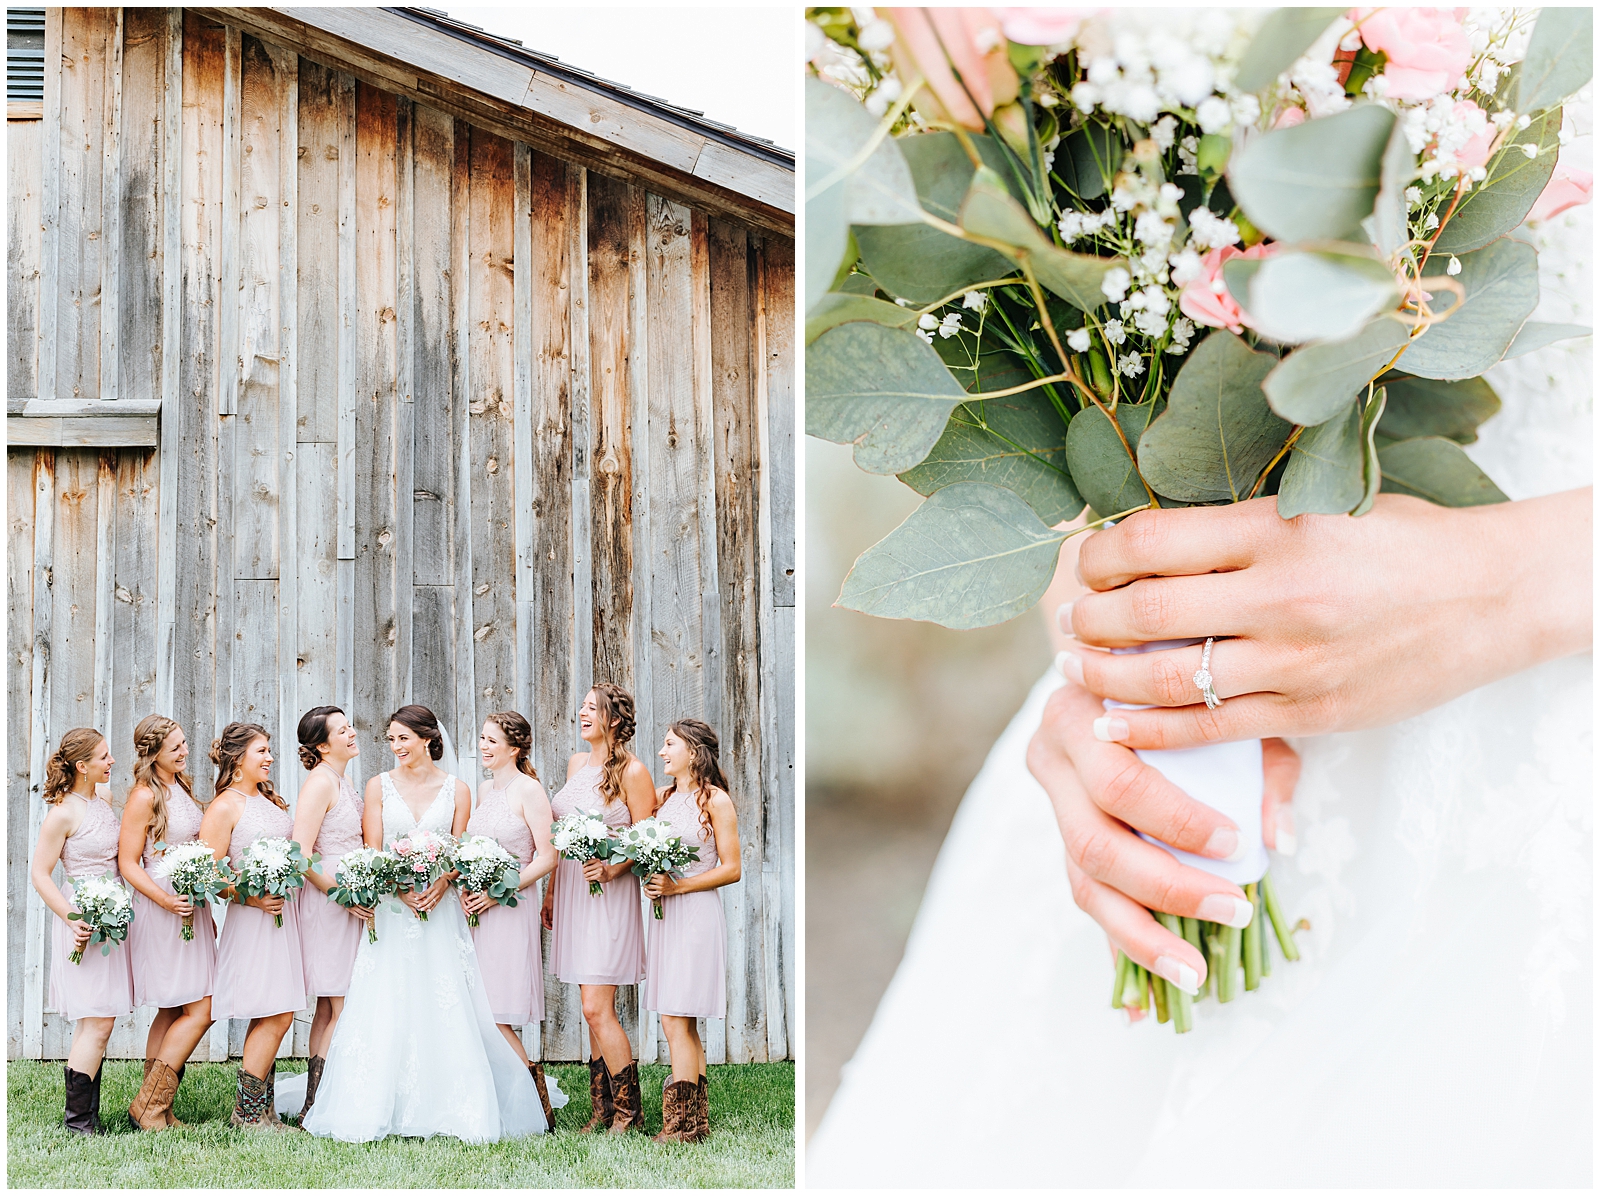 Bridesmaids in blush dresses with cowboy boots and bride's bouquet detail